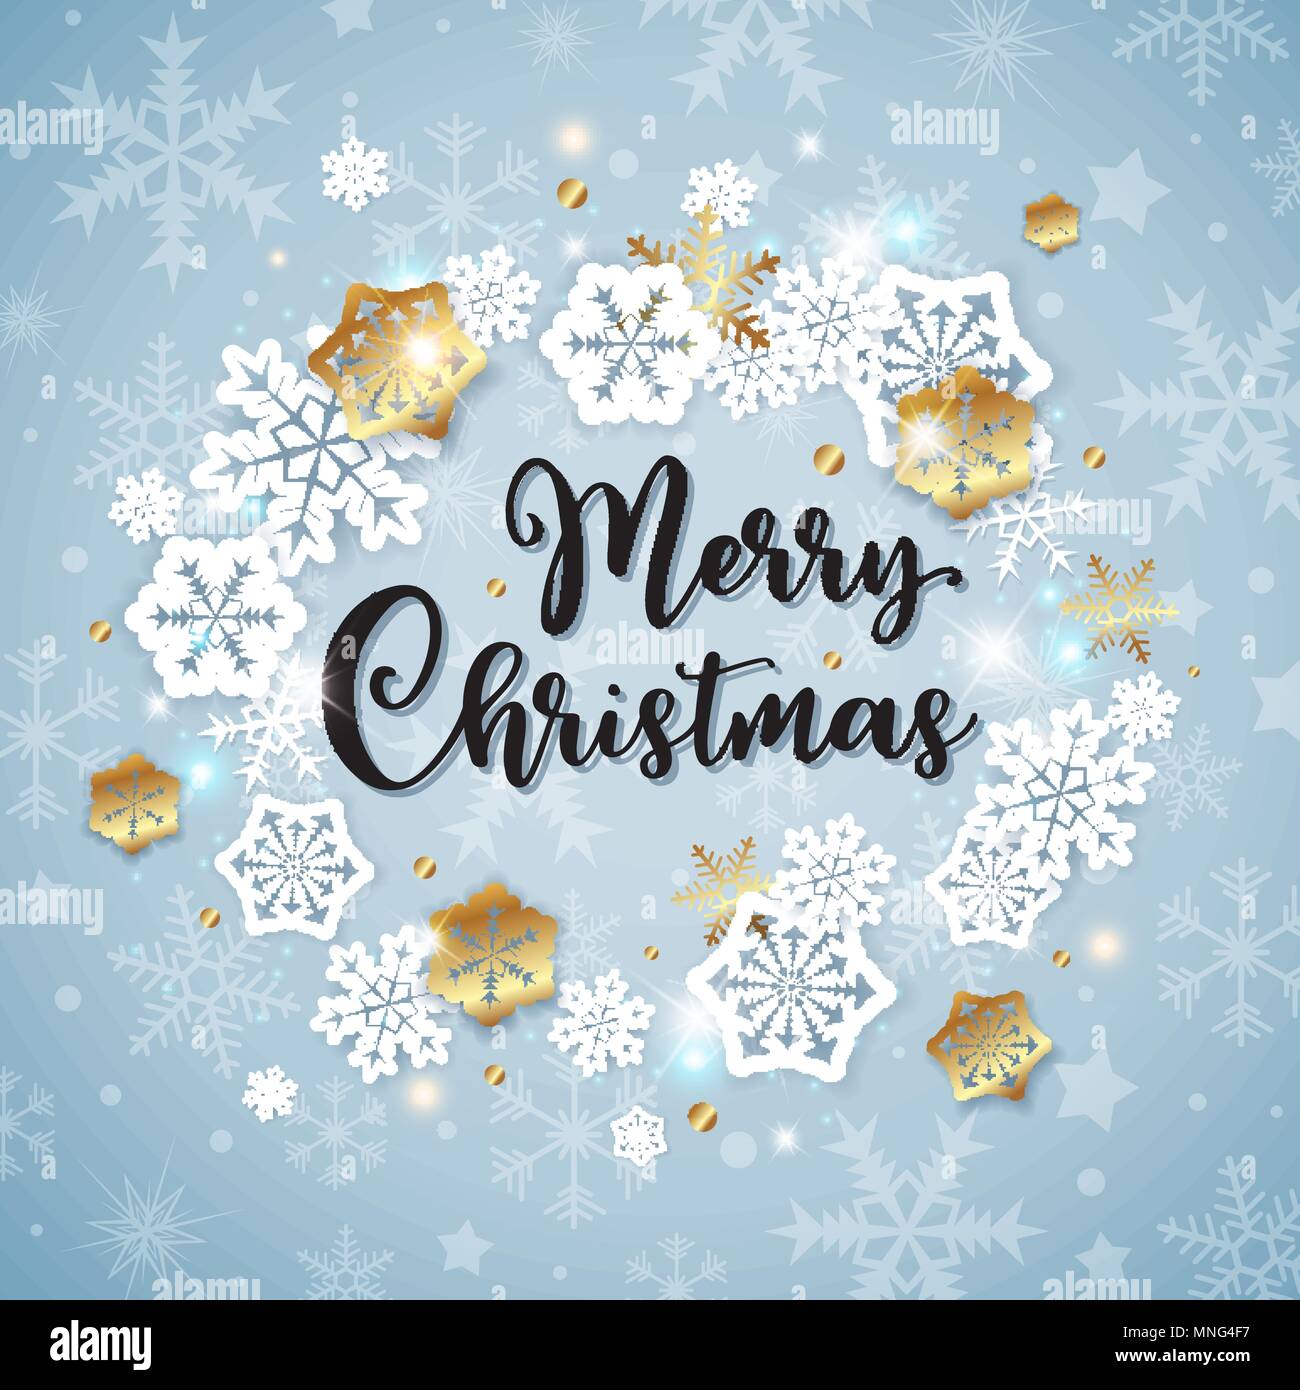 Vector Christmas banner with white and golden paper snowflakes on a blue background. Merry Christmas lettering. Stock Vector